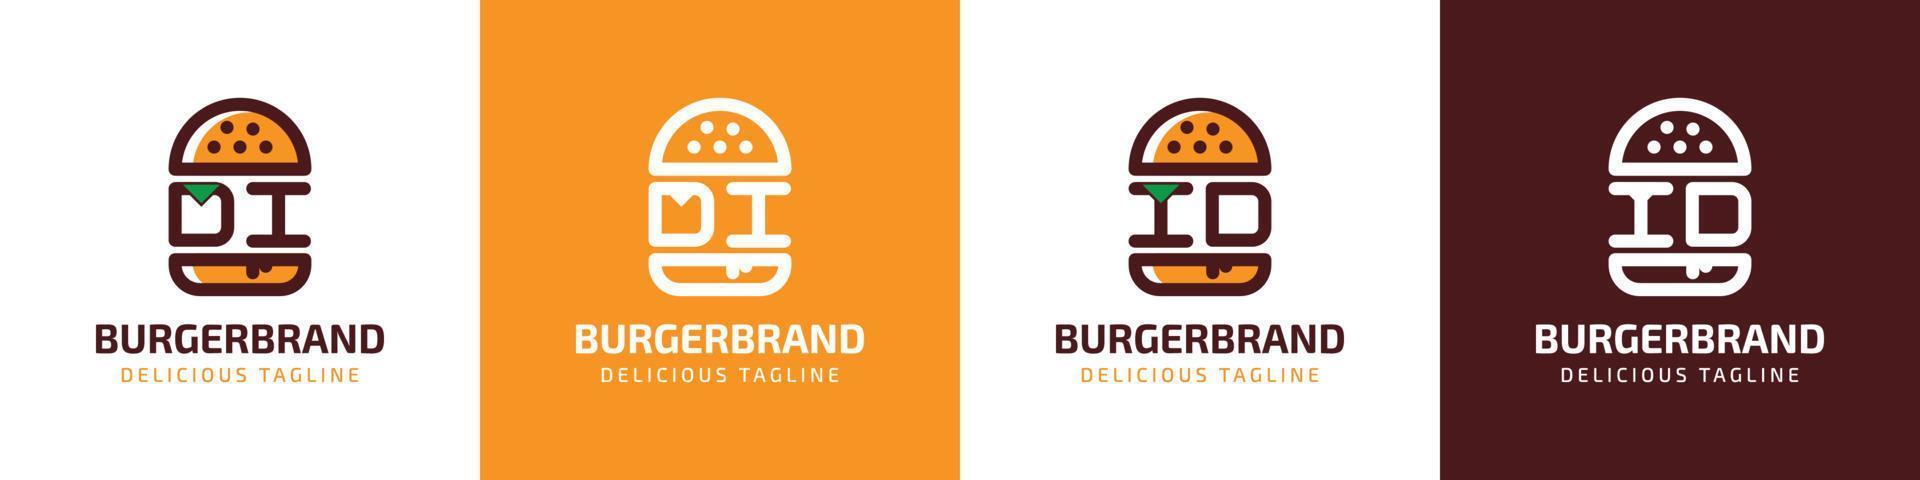 Letter DI and ID Burger Logo, suitable for any business related to burger with DI or ID initials. vector